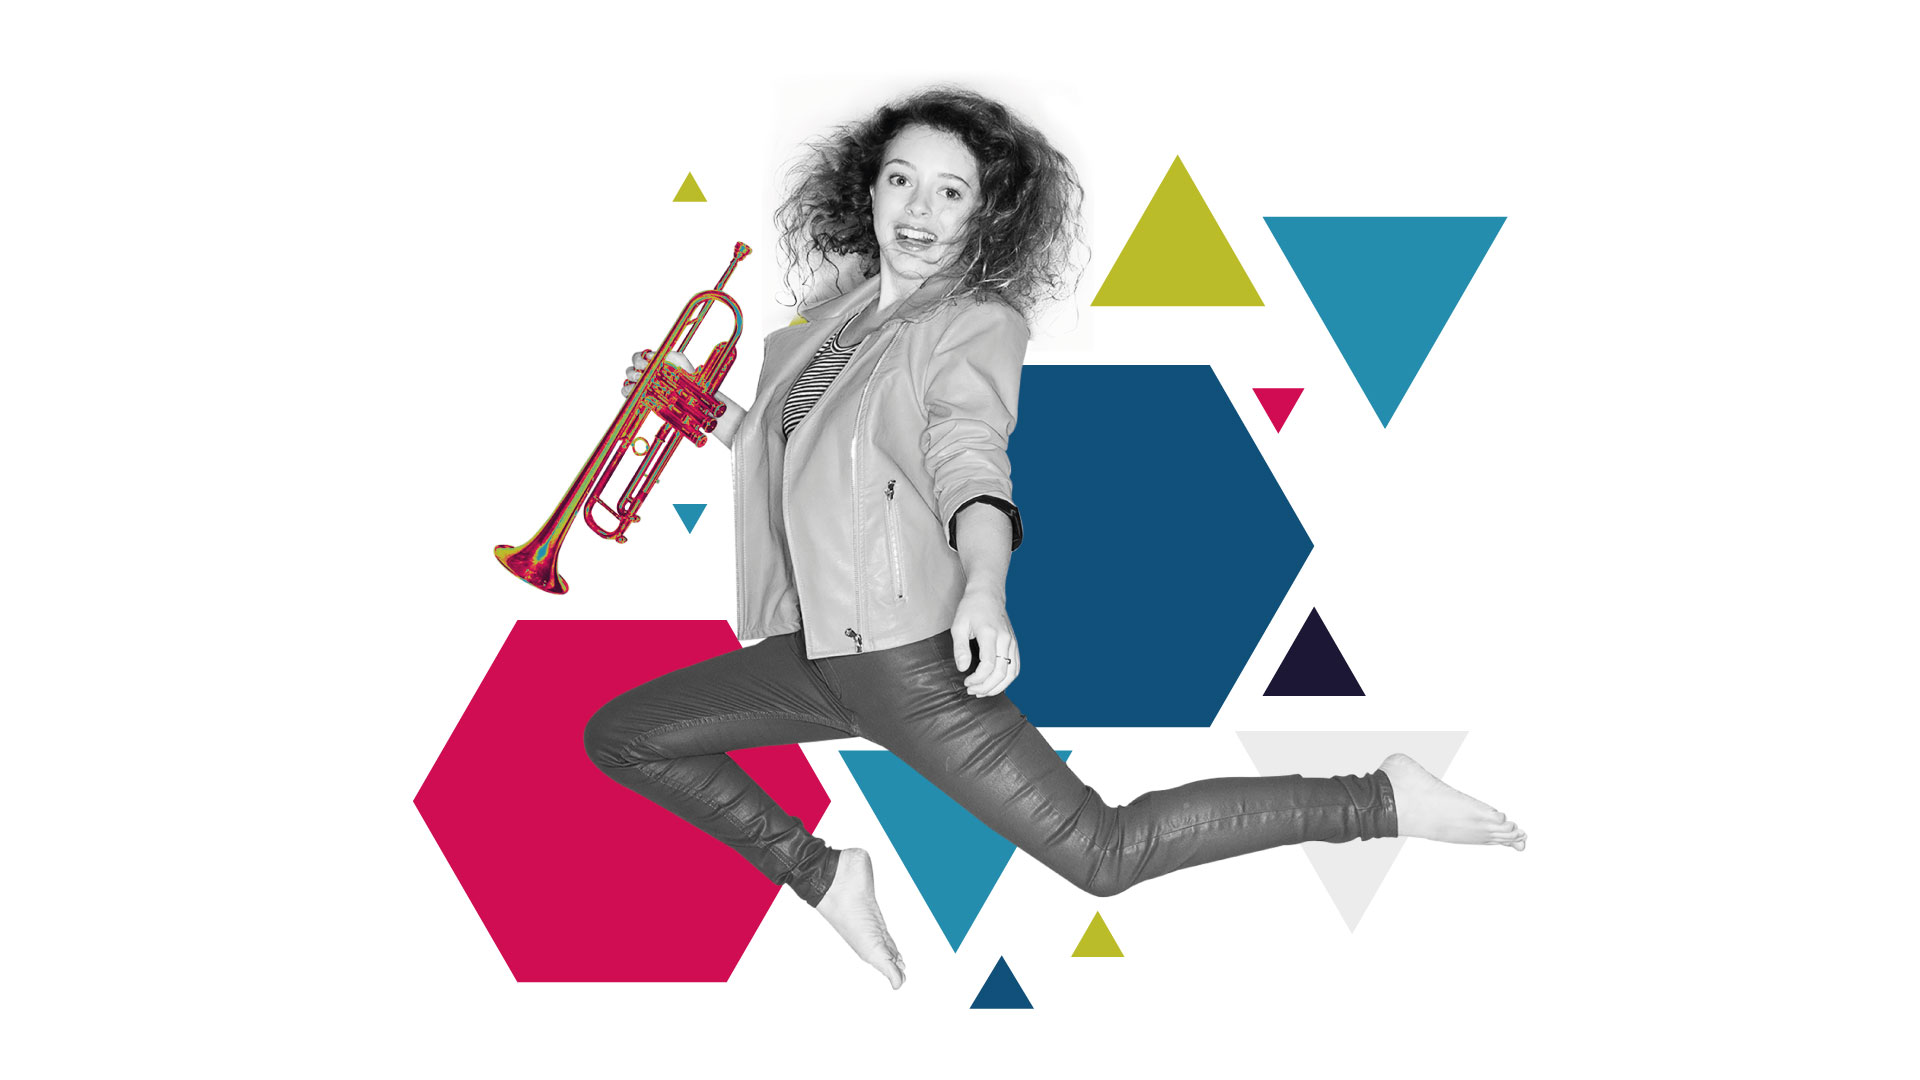 Female trumpeter jumping above a background of coloured abstract shapes